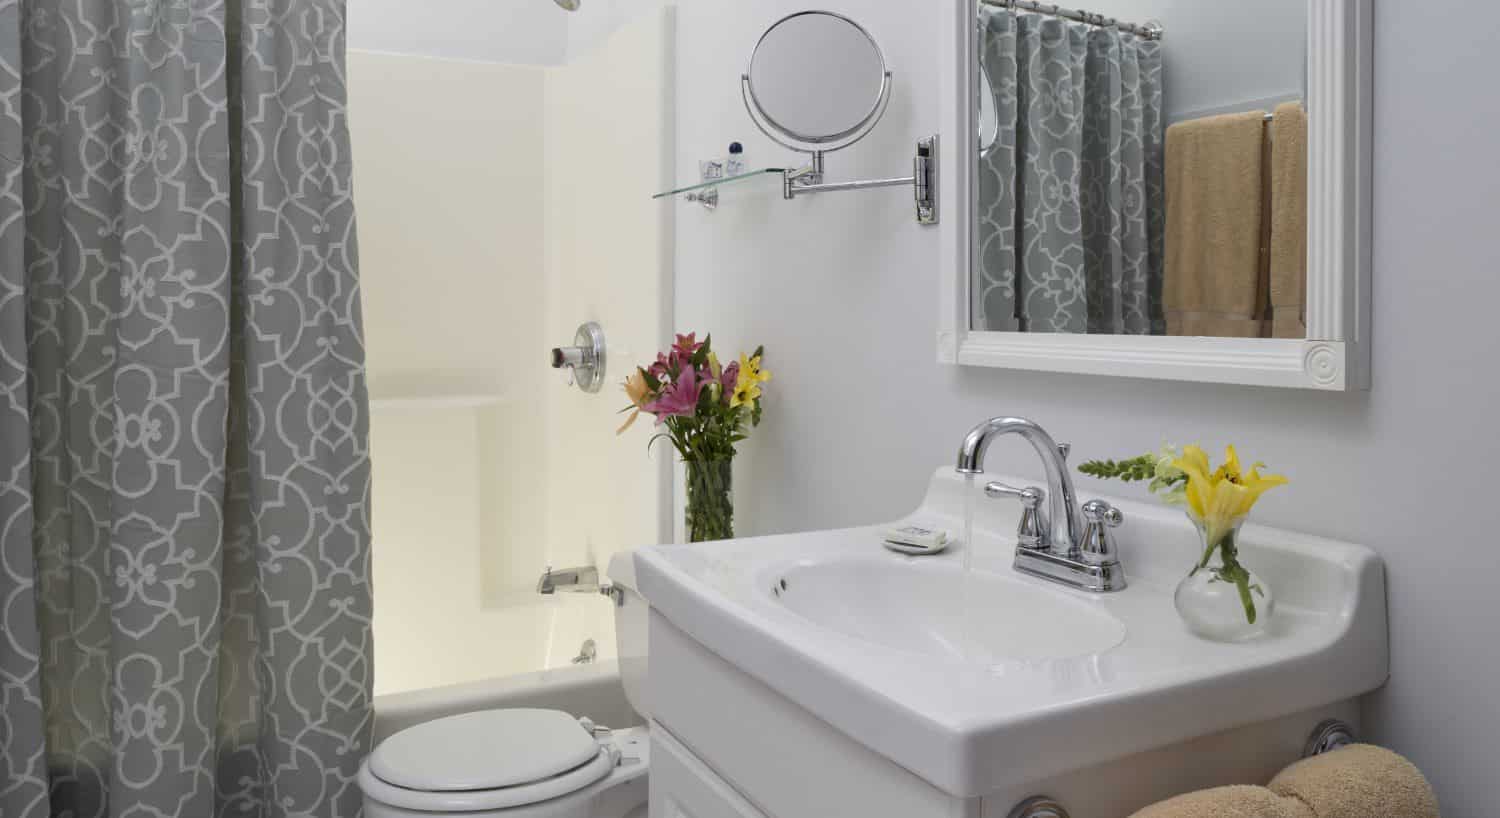 Bathroom with light gray walls, white sink, white vanity, gray and white shower curtain, and white-trimmed mirror